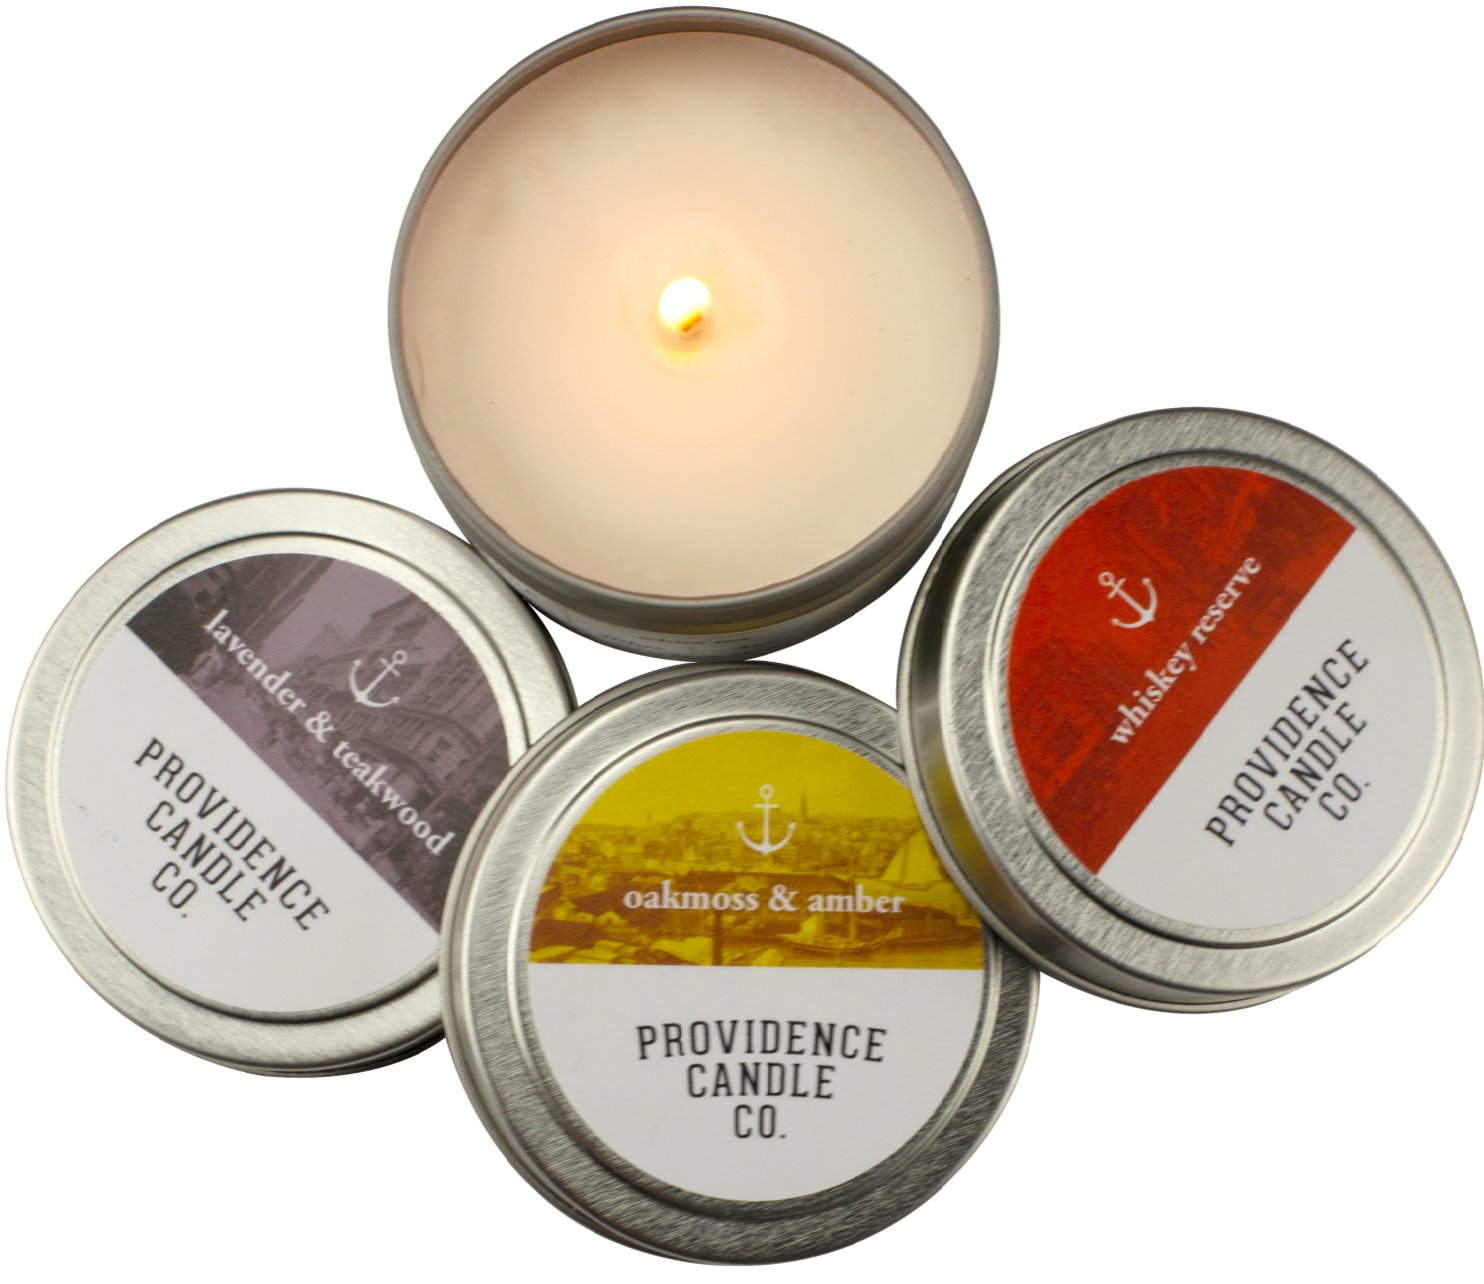 Providence Candle Company: Pure soy candles, sustainably sourced and blended with essential oils. 4 oz tin, $7.